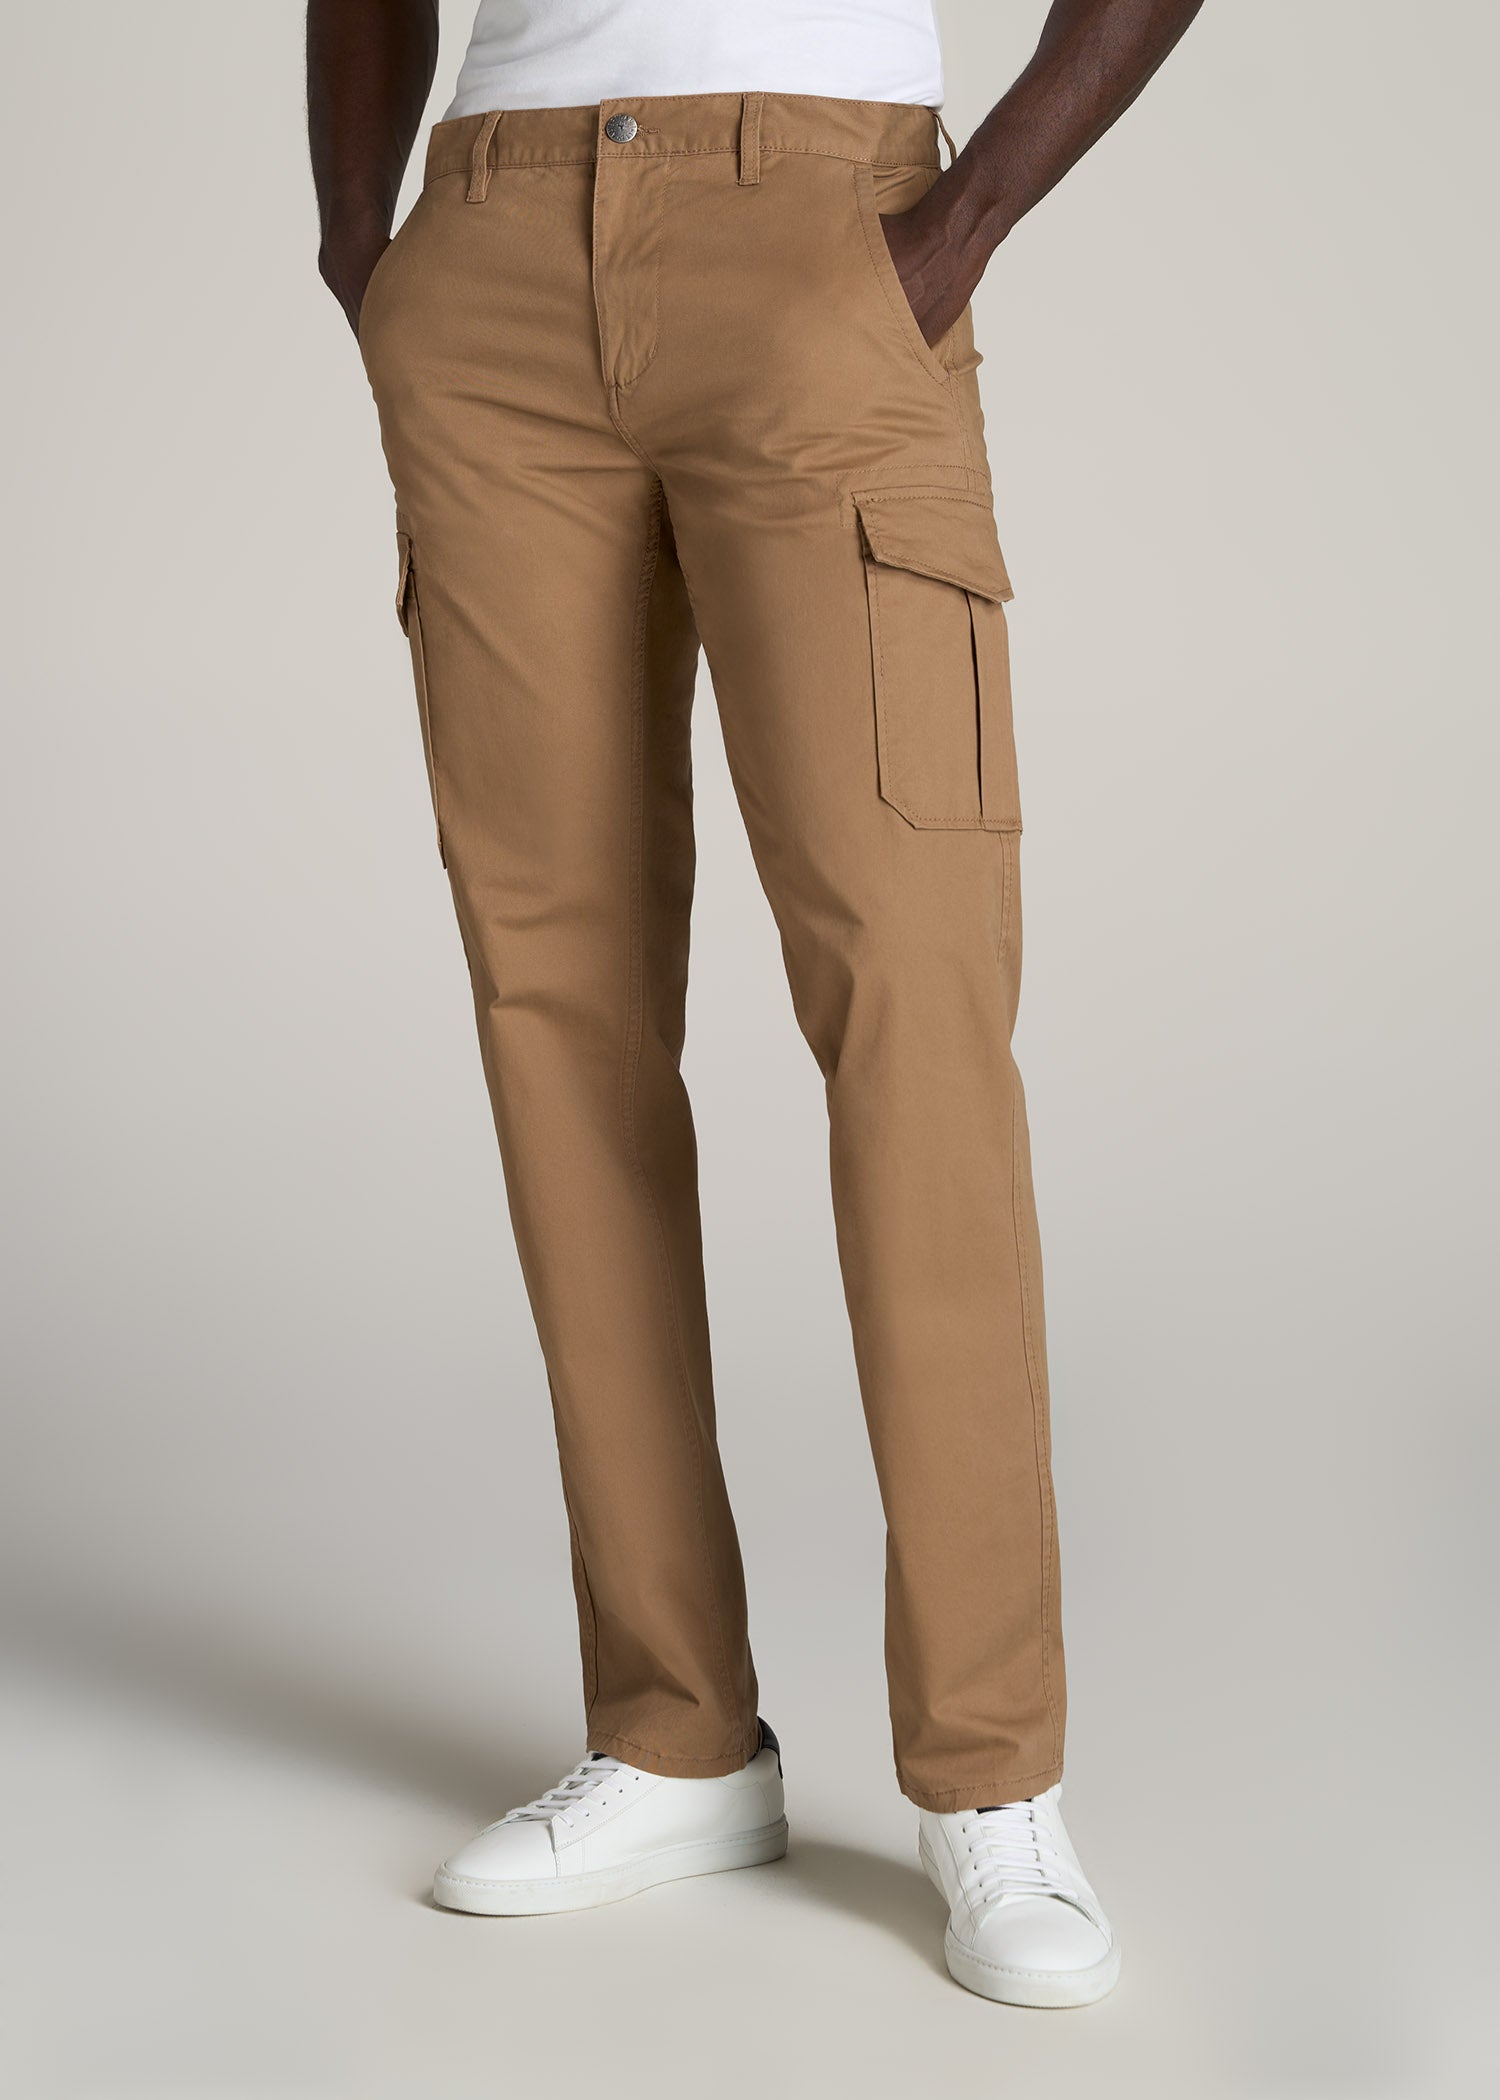 Men\'s Tall Cargos: Stretch Twill Cargo Russet Brown Pants – American Tall